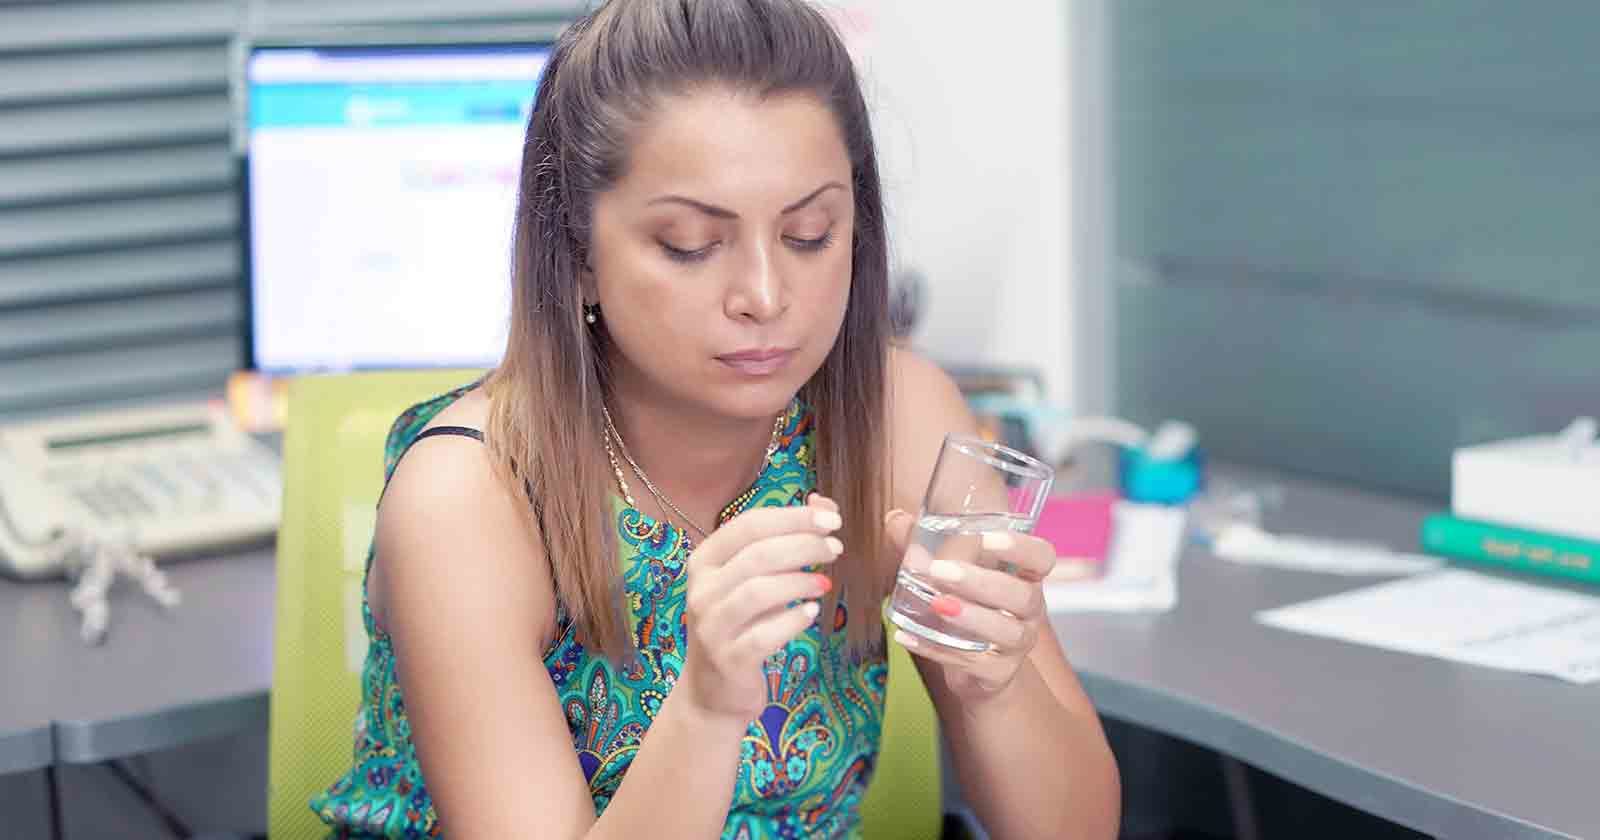 5 reasons it's important to drug test